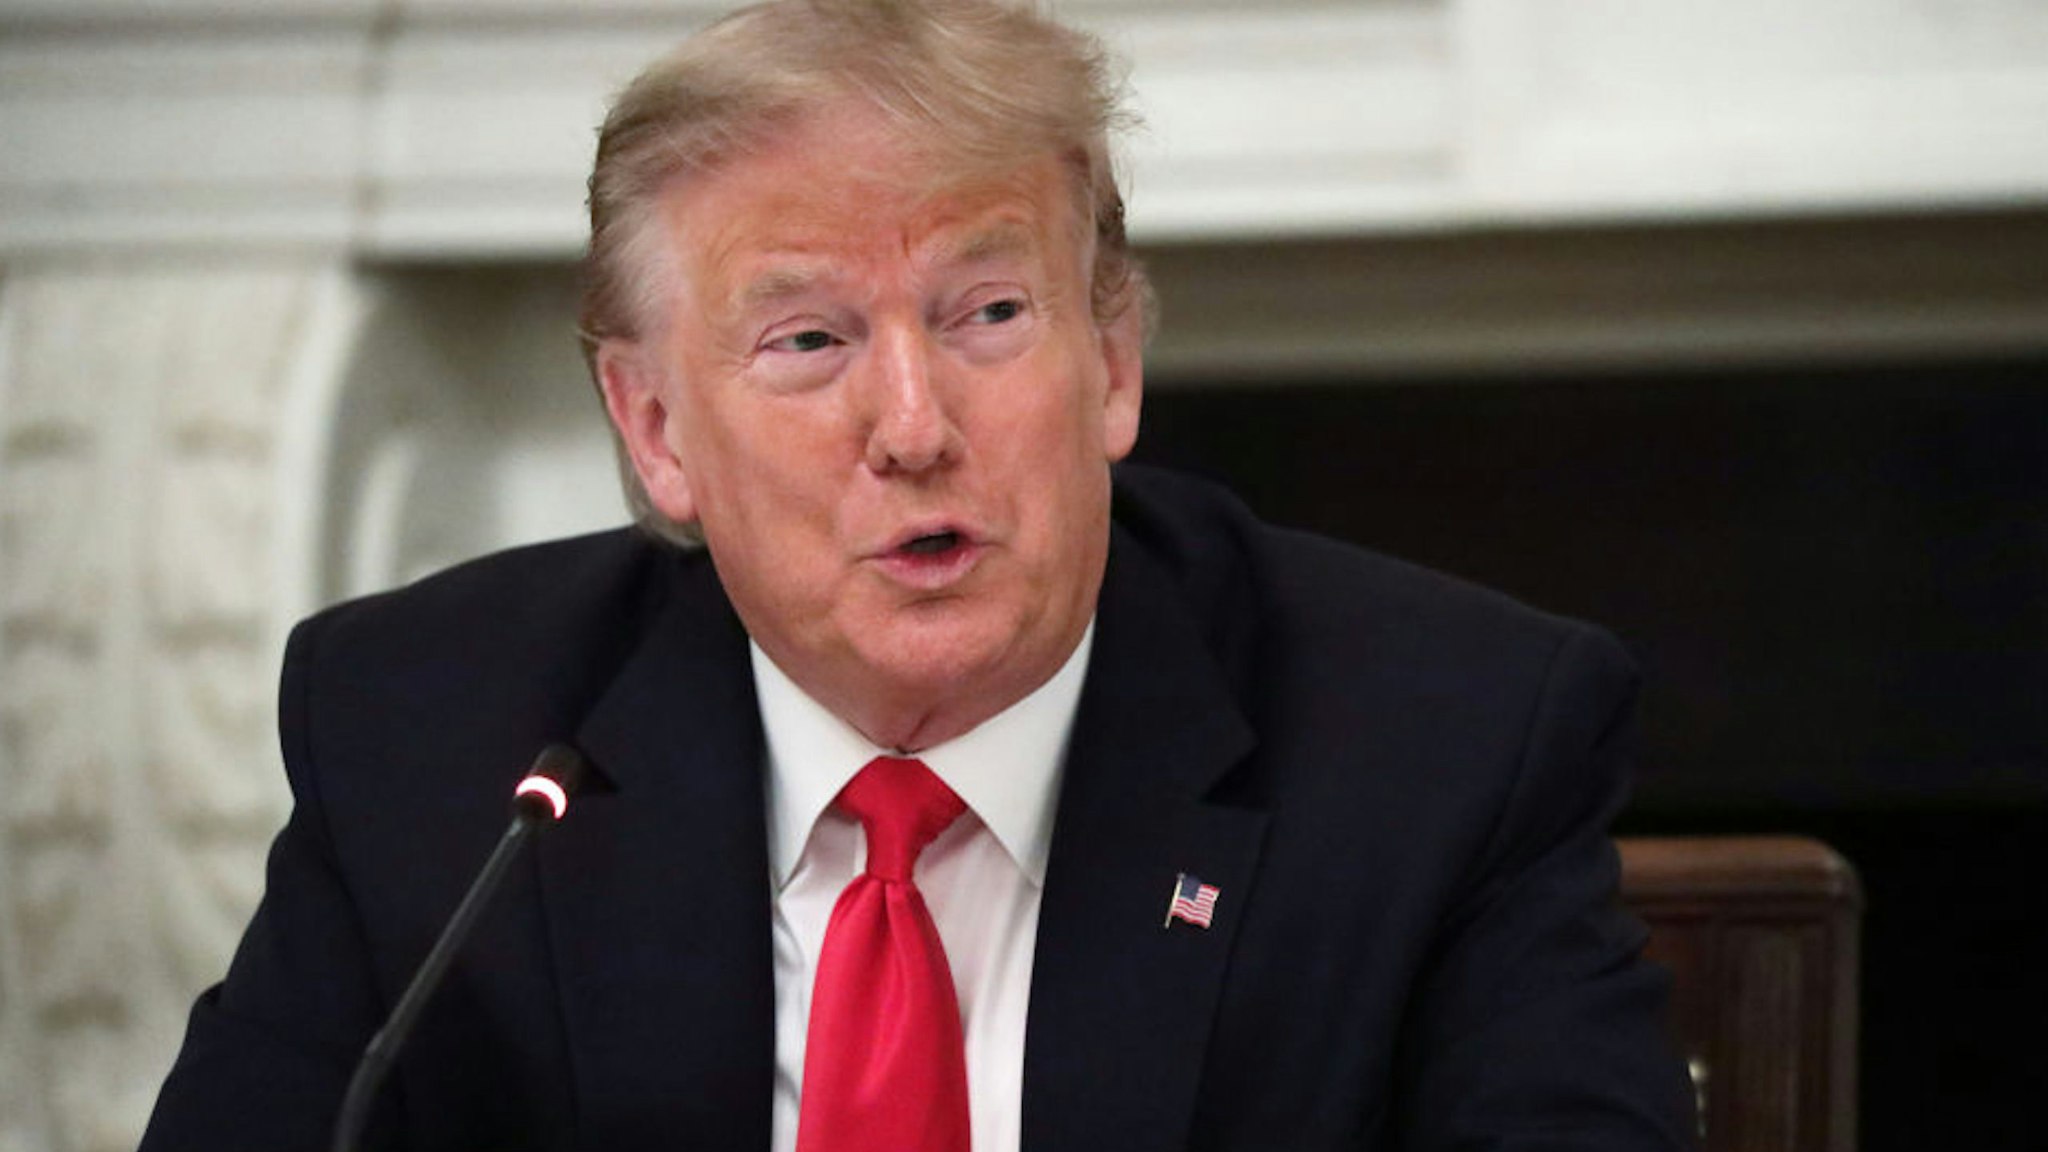 WASHINGTON, DC - JUNE 18: U.S. President Donald Trump speaks during a roundtable at the State Dining Room of the White House June 18, 2020 in Washington, DC. President Trump held a roundtable discussion with Governors and small business owners on the reopening of American‚Äôs small business.